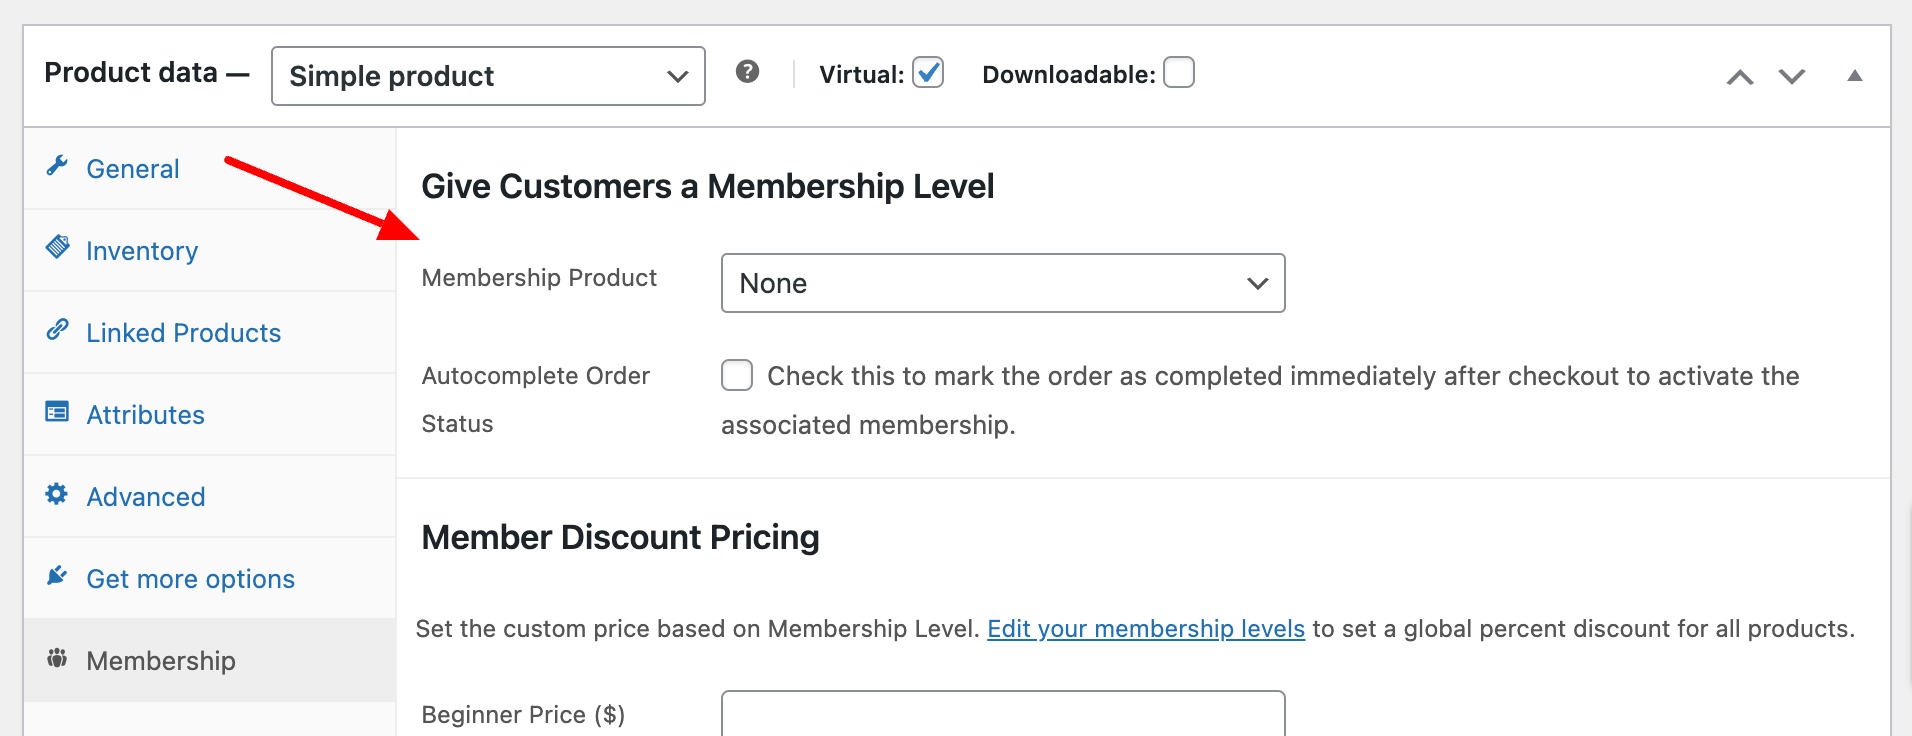 Screenshot of the settings page when you edit a single product in WooCommerce